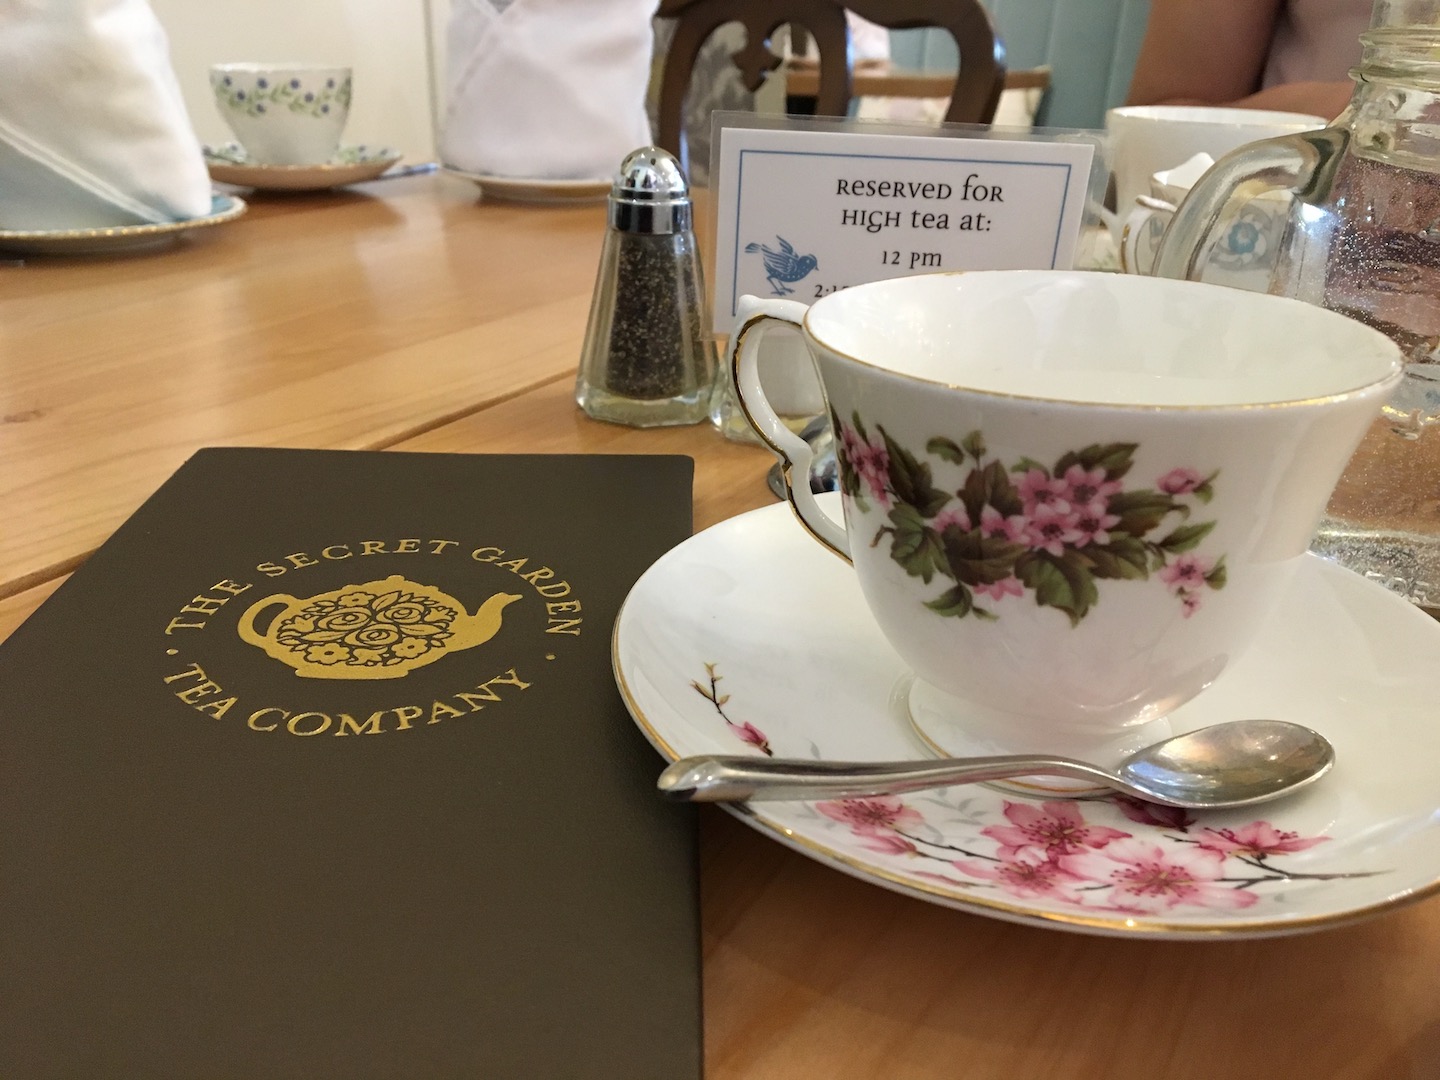 High afternoon tea at Secret Garden Tea Company in Kerrisdale Vancouver